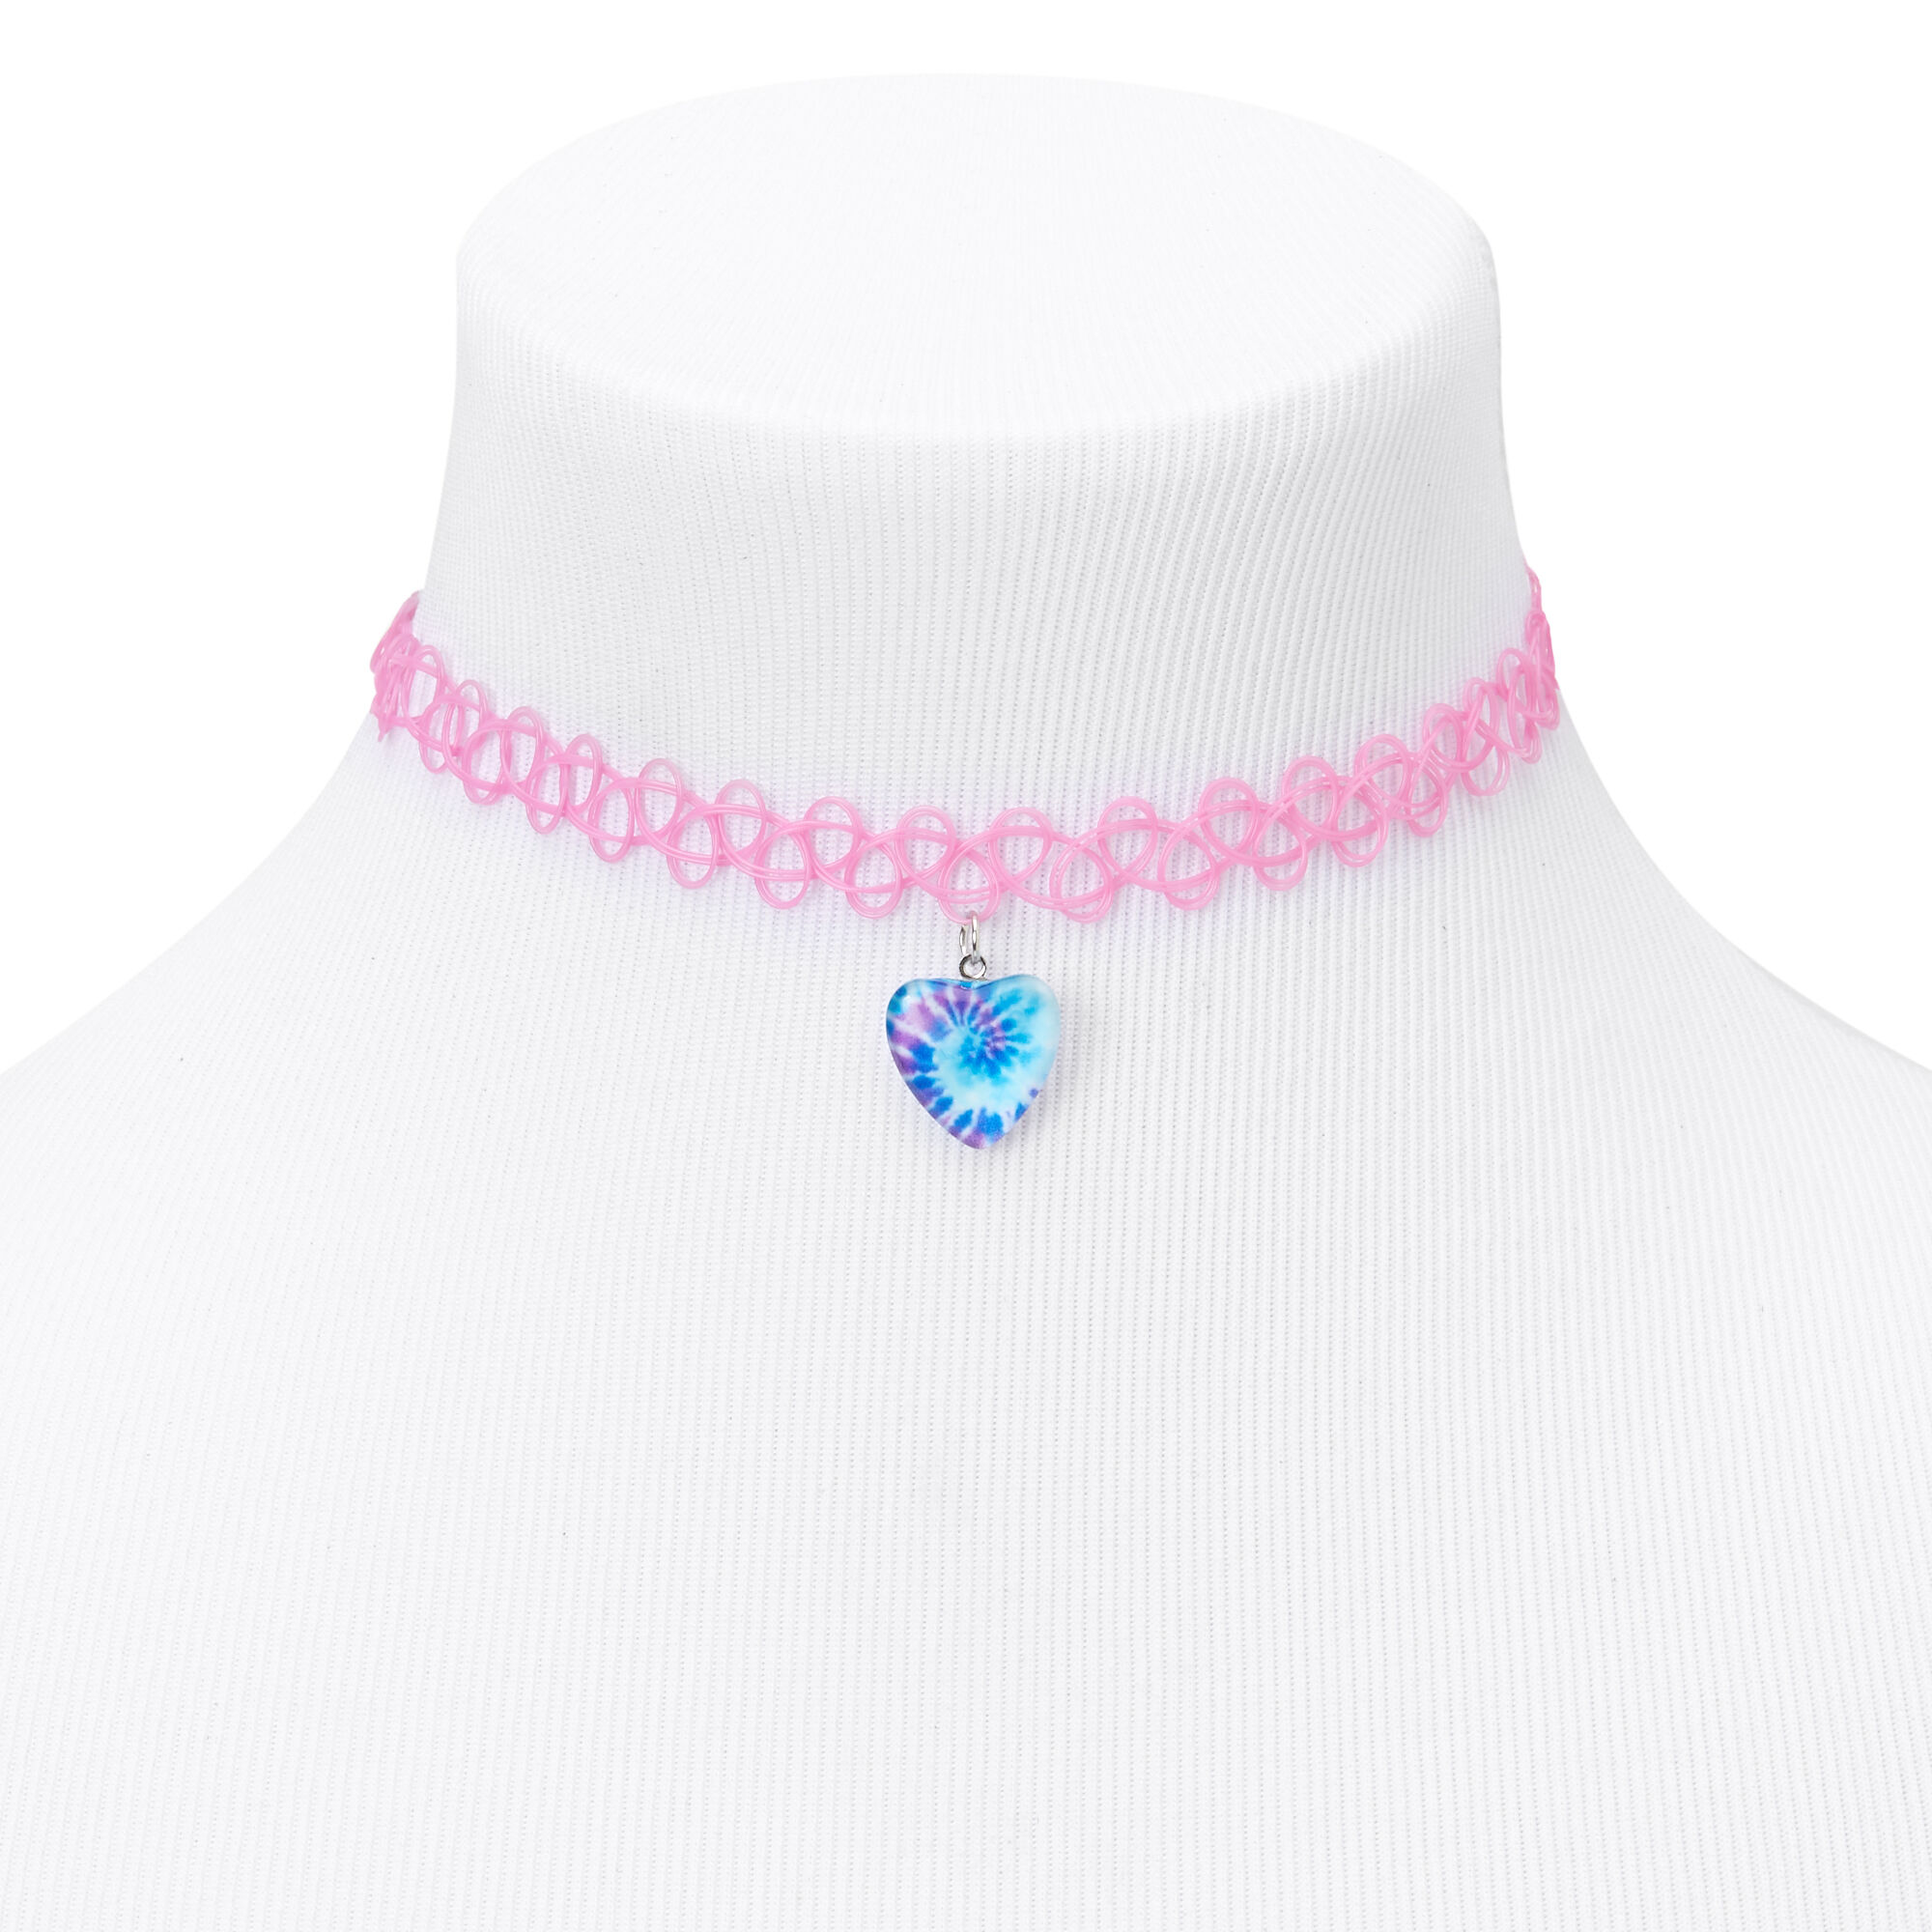 View Claires Tie Dye Heart Tattoo Choker Necklace Pink information